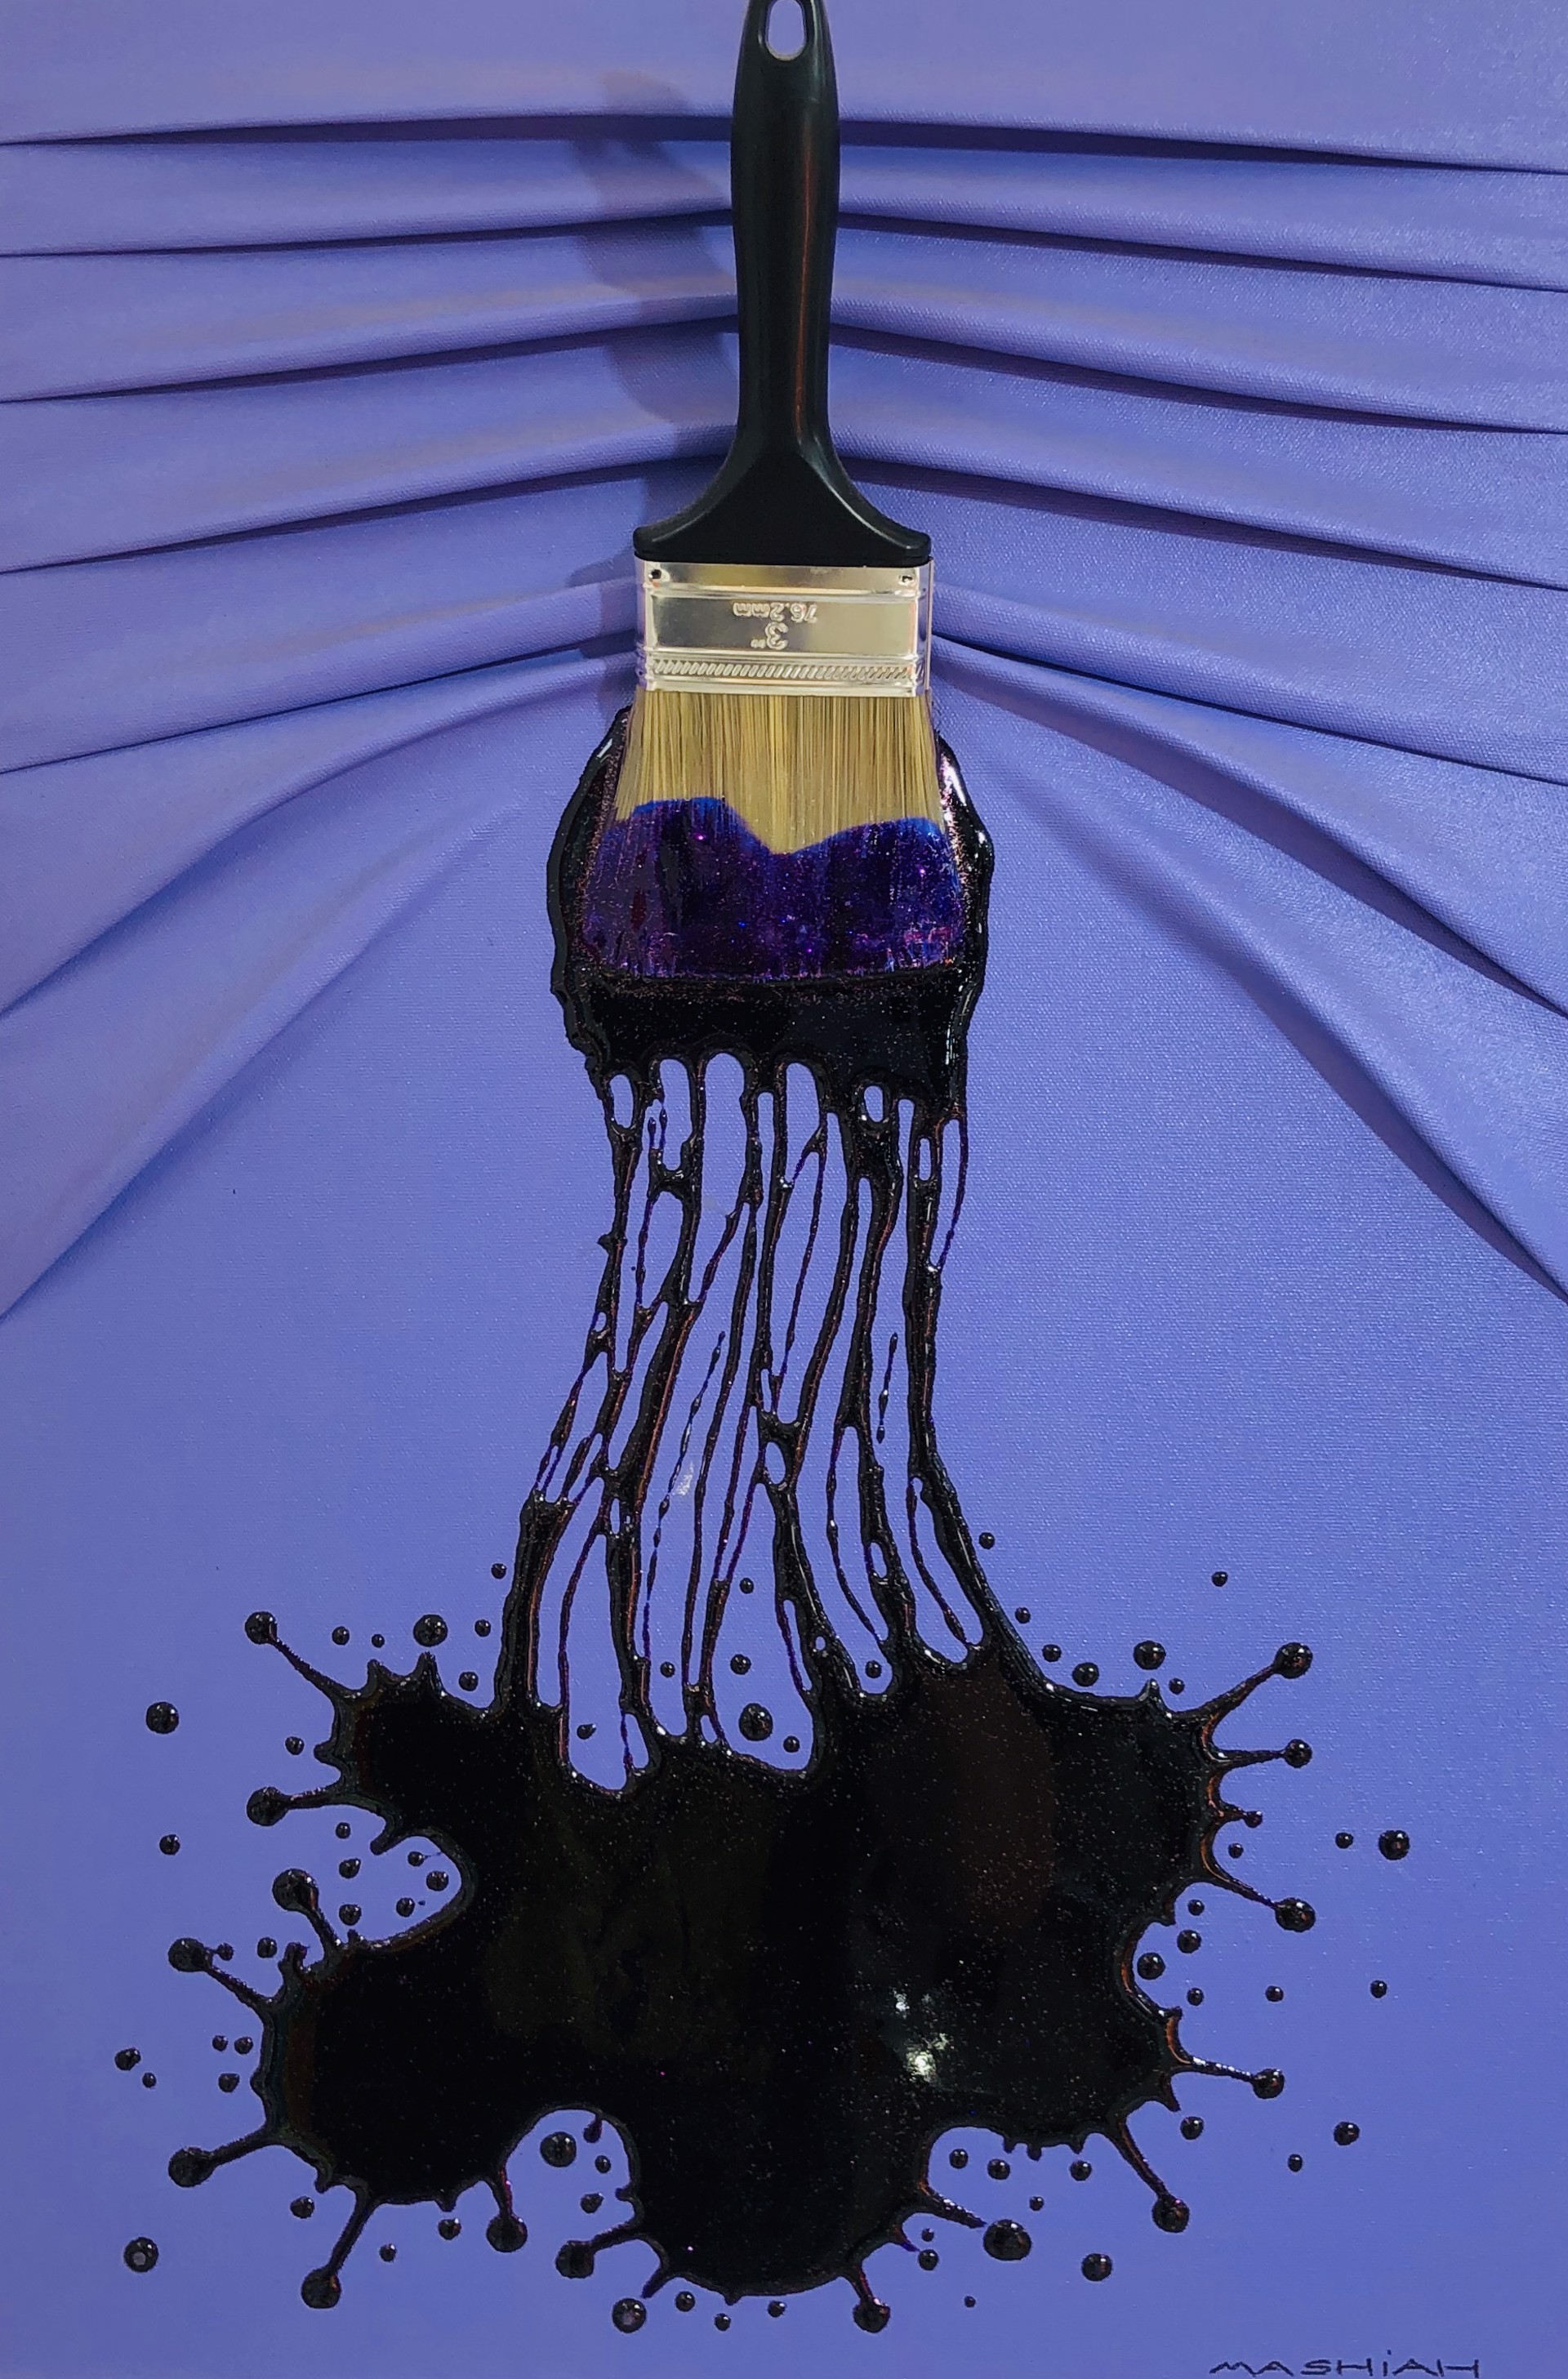 "Black Splash on Purple Small Canvas" by Brushes and Rollers "Let's Paint" by Efi Mashiah